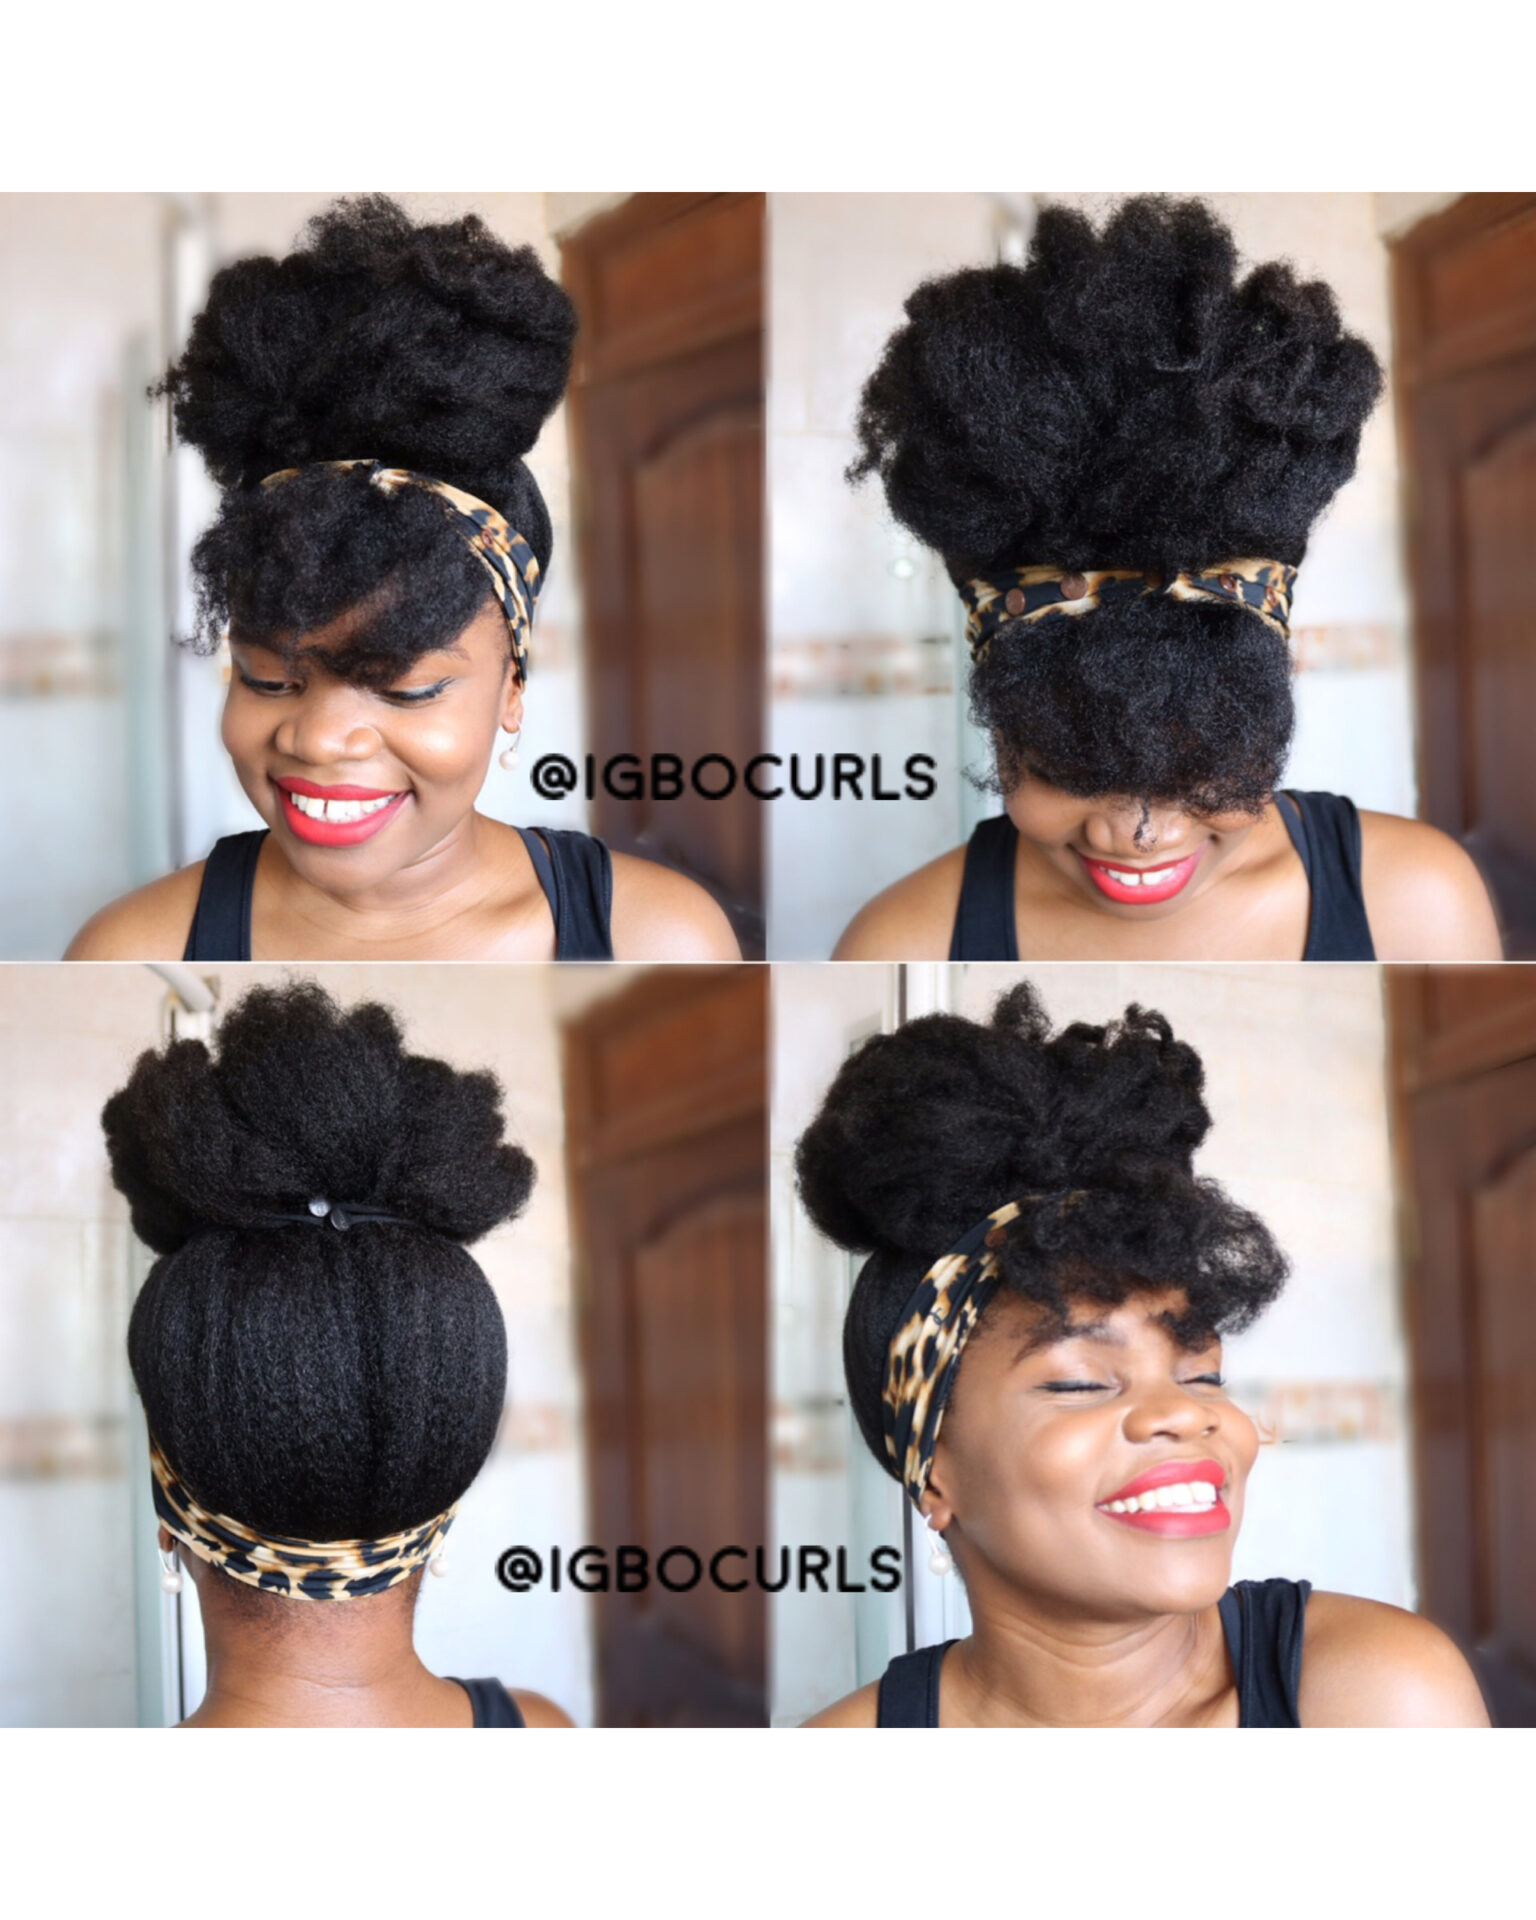 Natural Hairstyles ~Stay At Home & Style With Me - Igbocurls